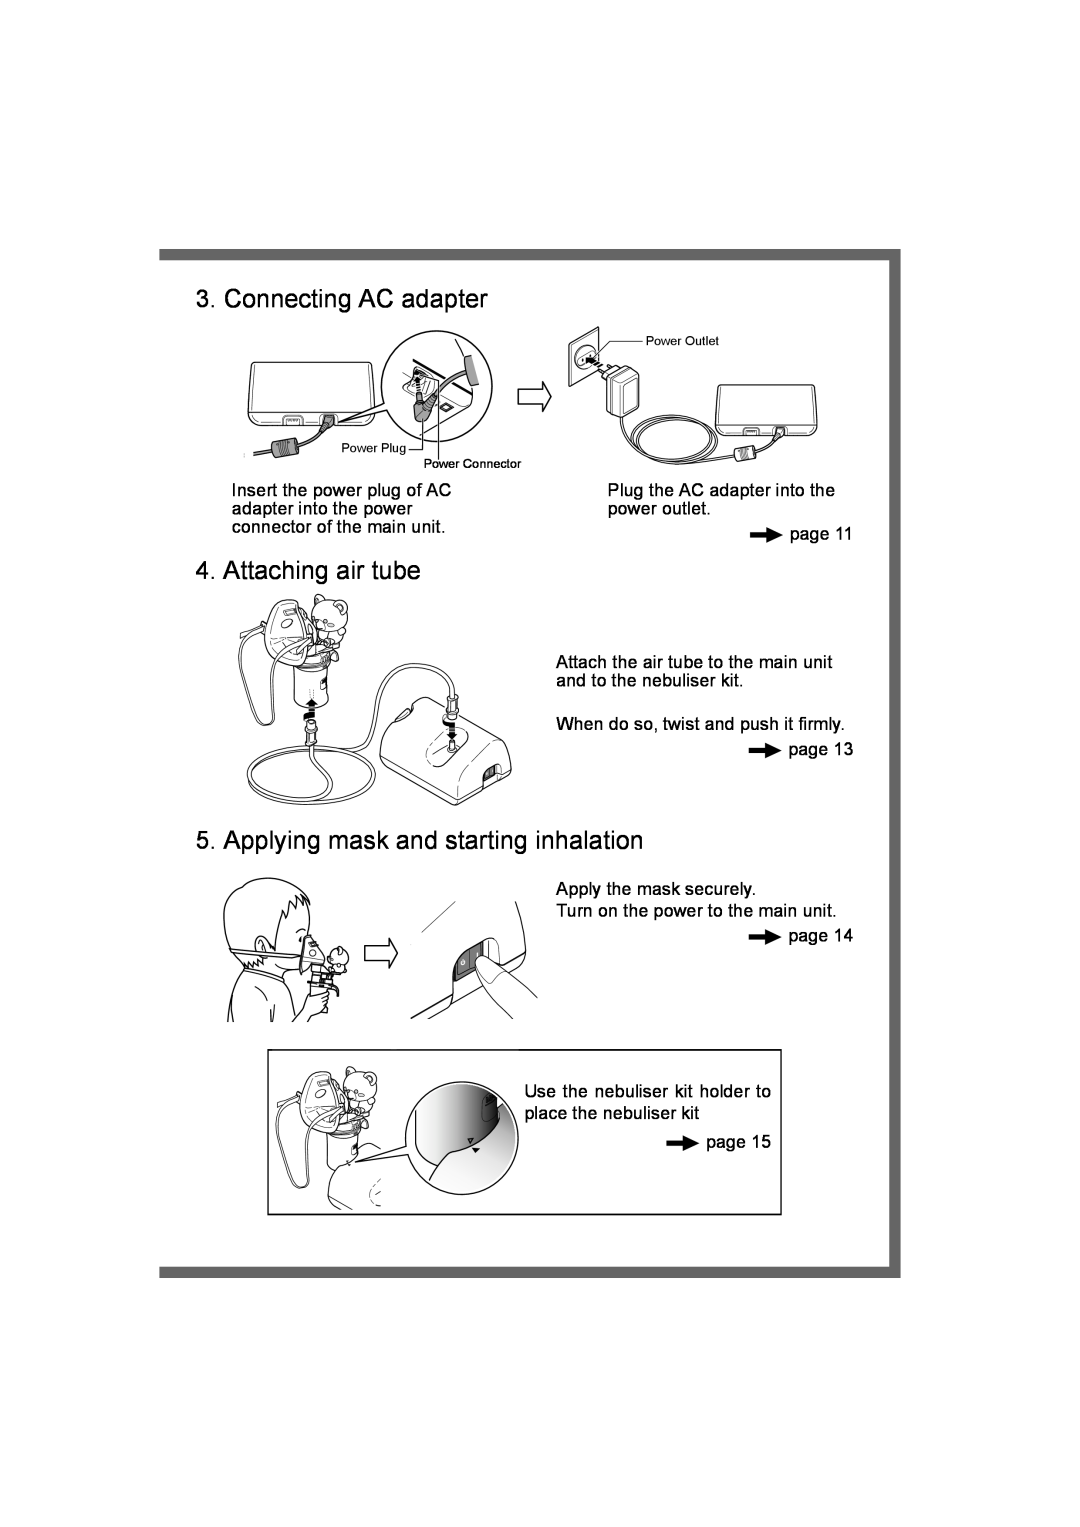 Omron NE- C801KD instruction manual Connecting AC adapter, Attaching air tube, Applying mask and starting inhalation 